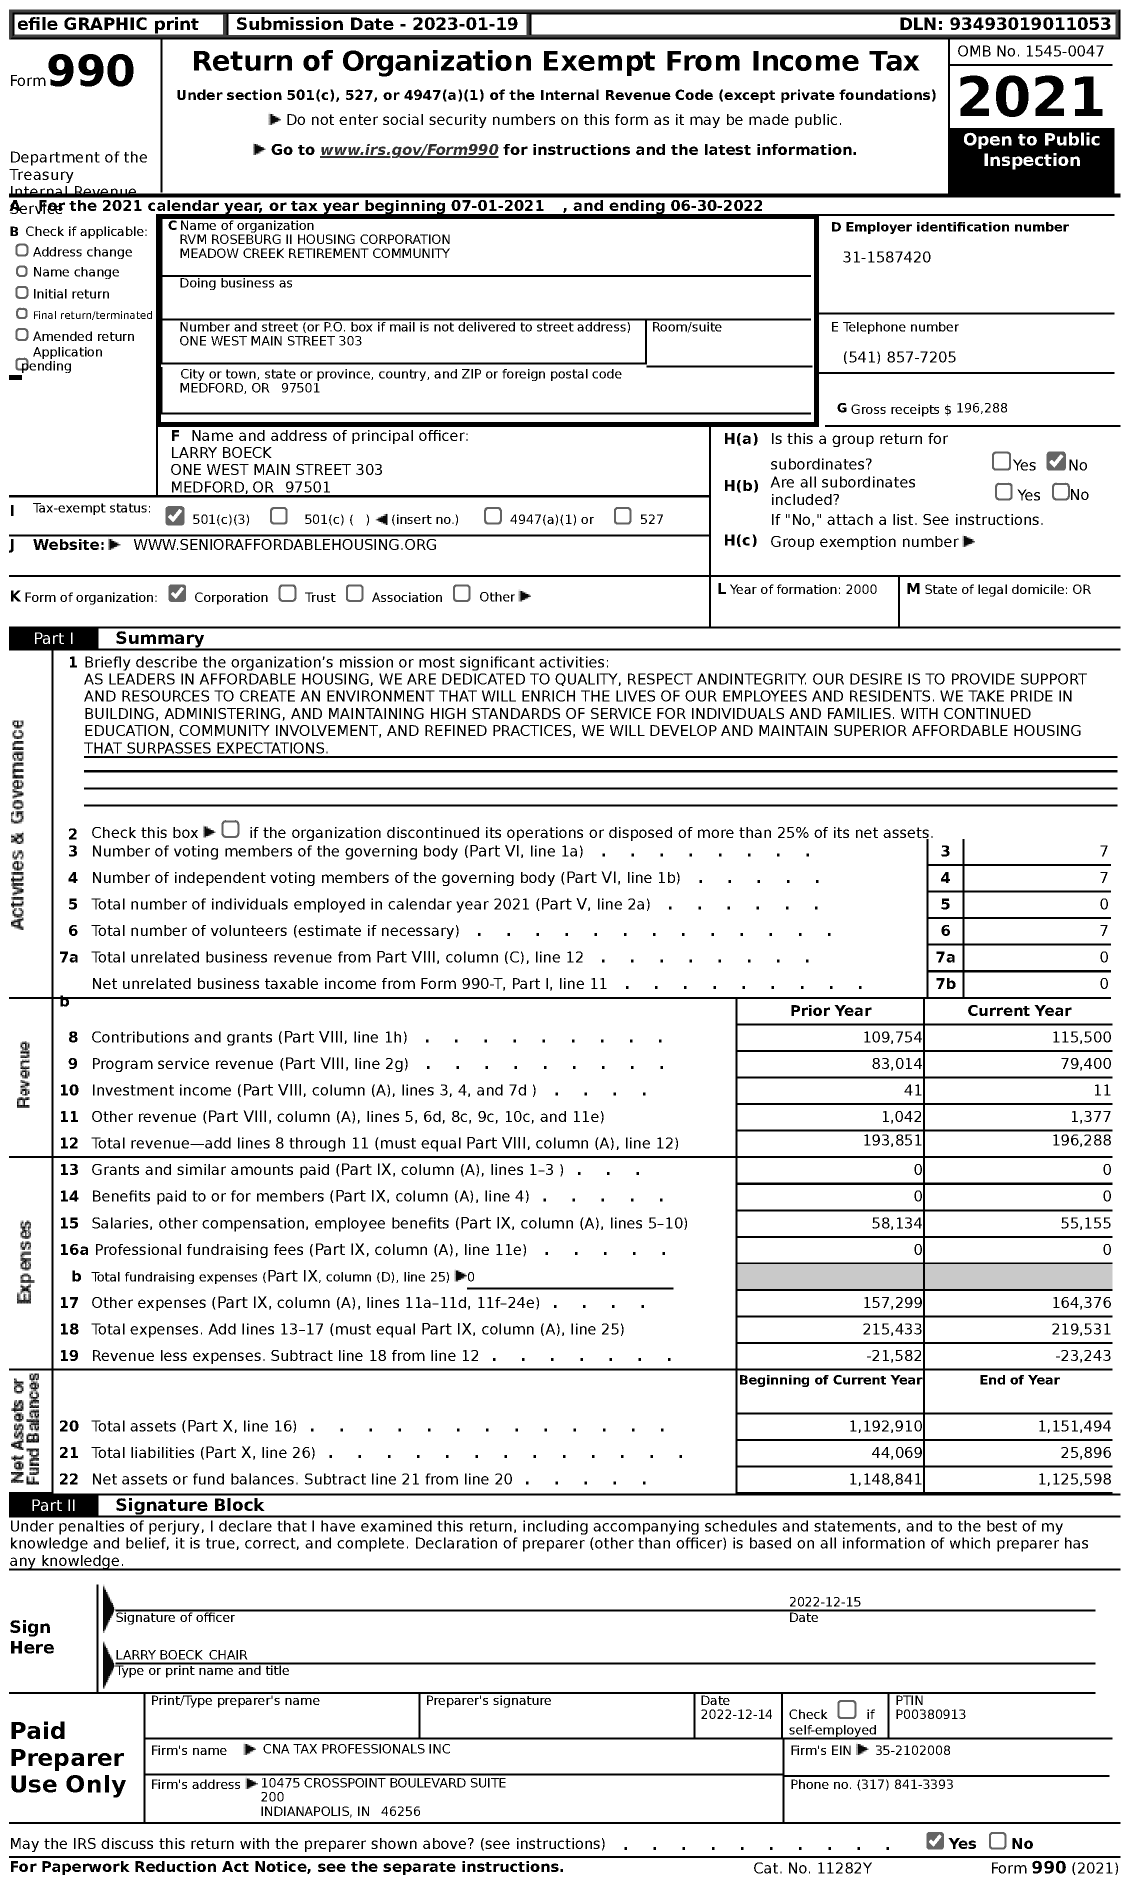 Image of first page of 2021 Form 990 for RVM Roseburg II Housing Corporation Meadow Creek Retirement Community